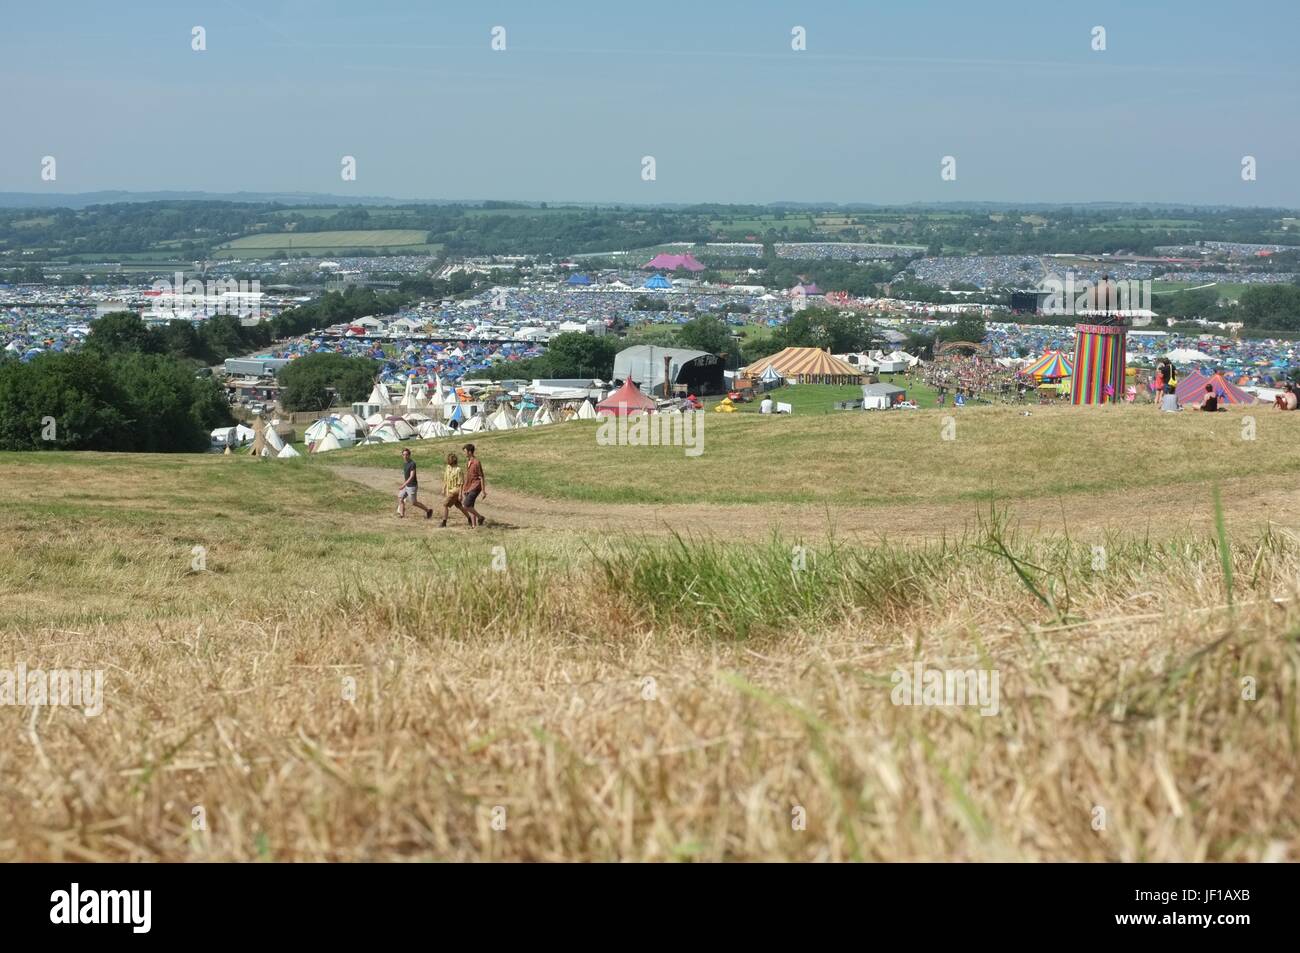 The view from the hill near the Park field overlooking Glastonbury Festival, Pilton, Somerset, England, United Kingdom, June 2017. Stock Photo